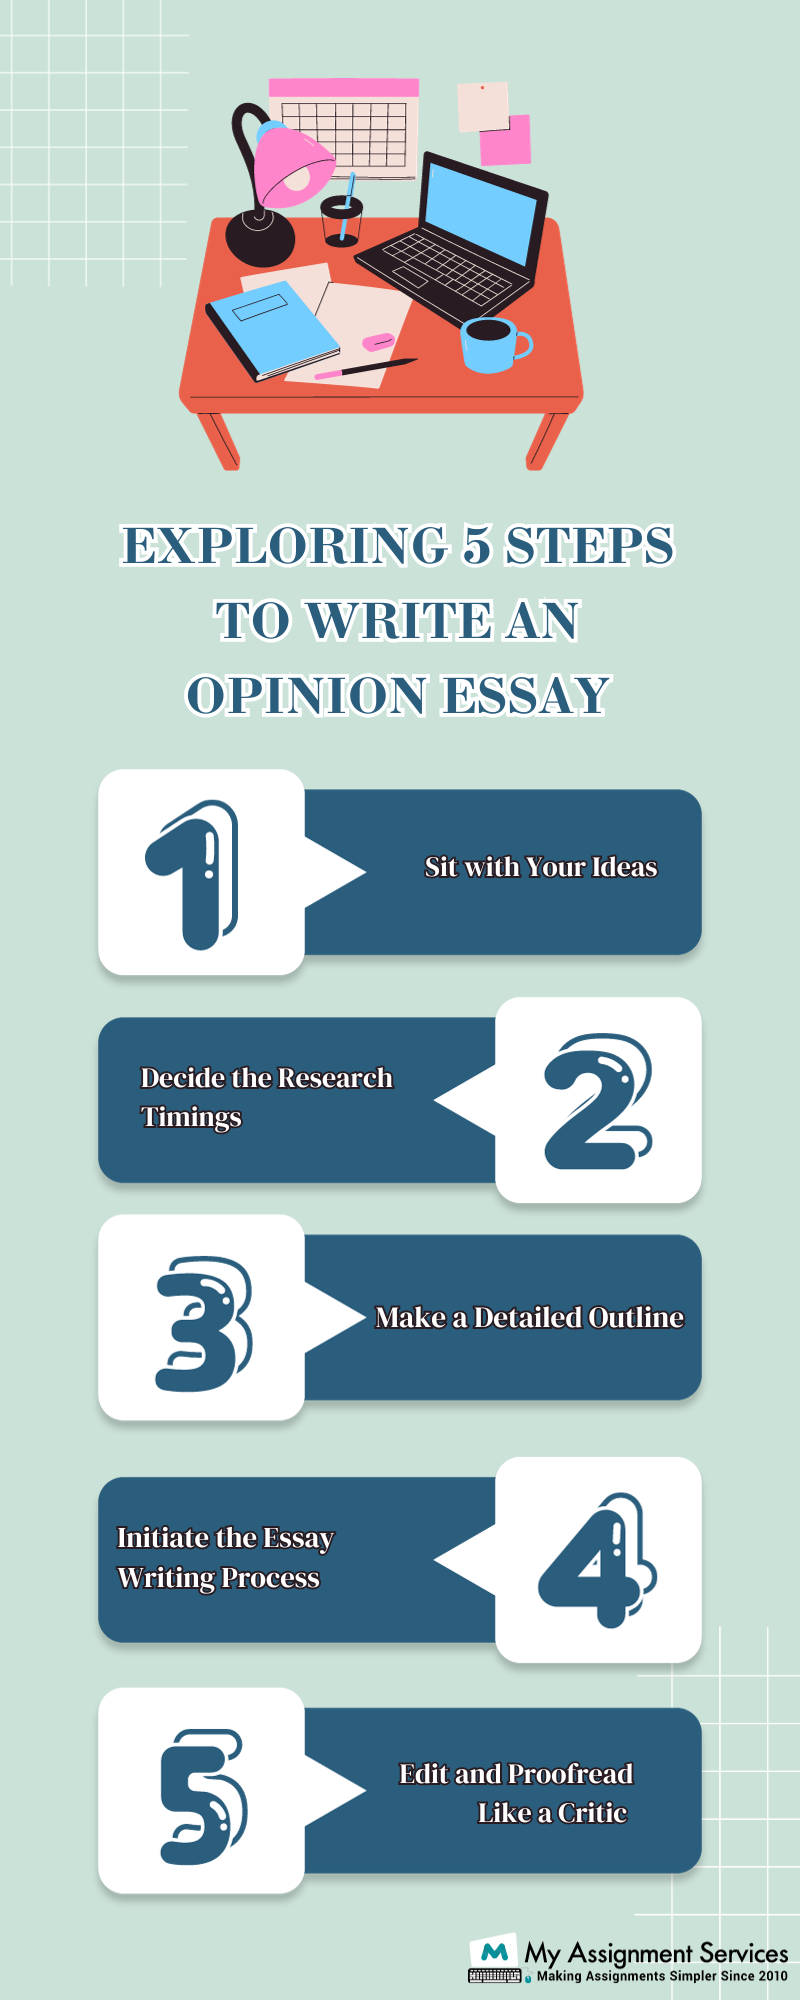 Exploring 5 Steps to Write an Opinion Essay